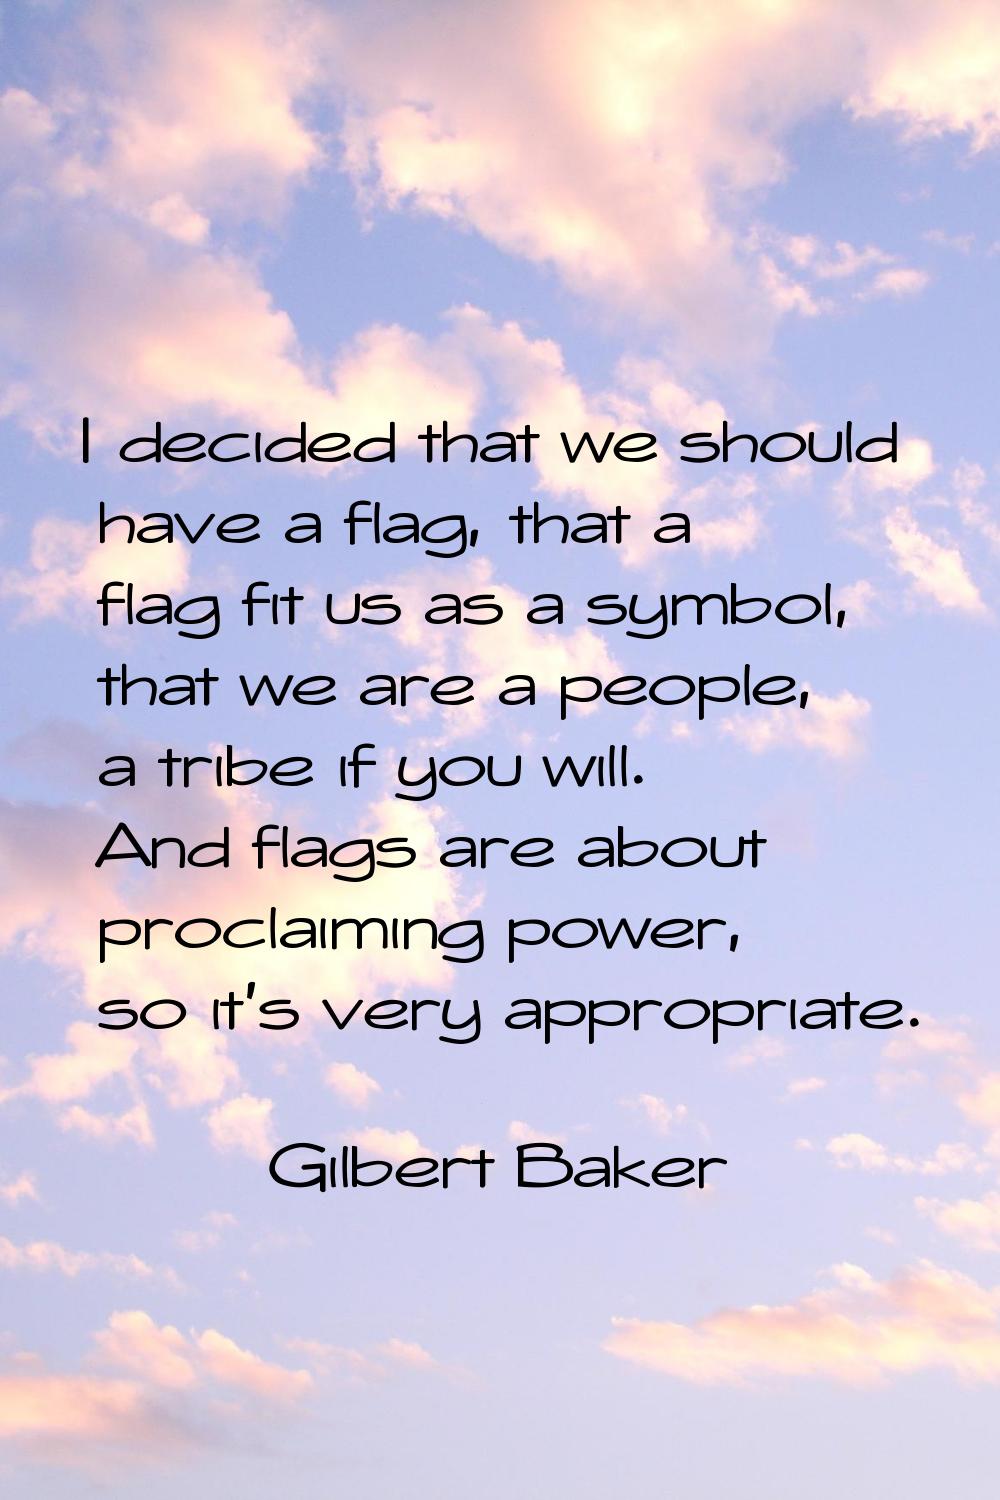 I decided that we should have a flag, that a flag fit us as a symbol, that we are a people, a tribe